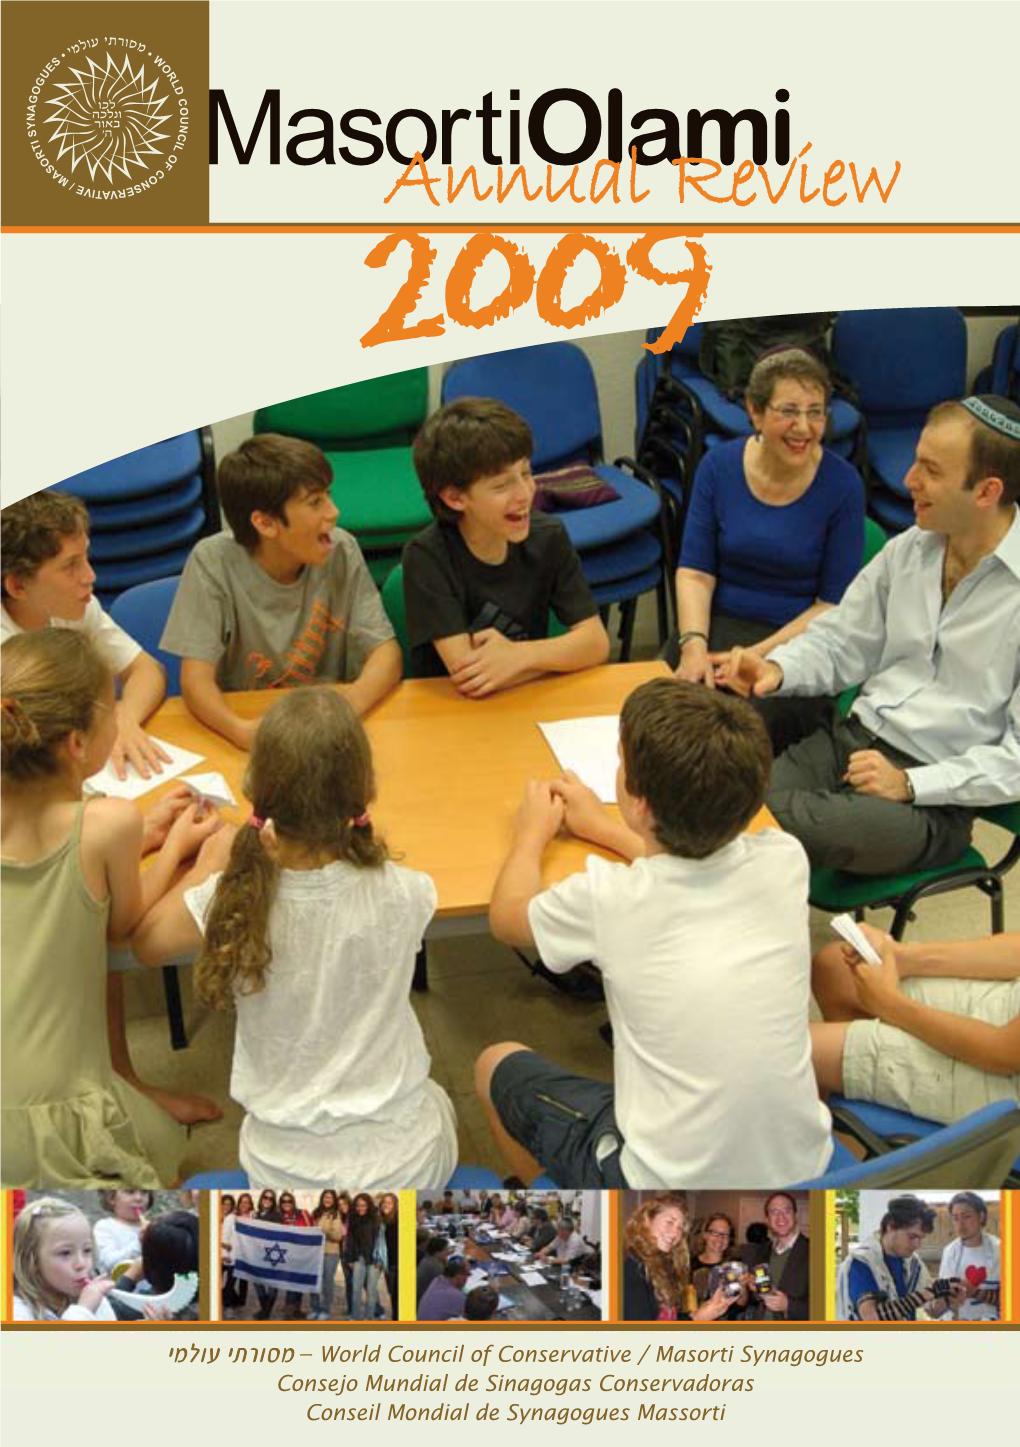 Annual Review 2009